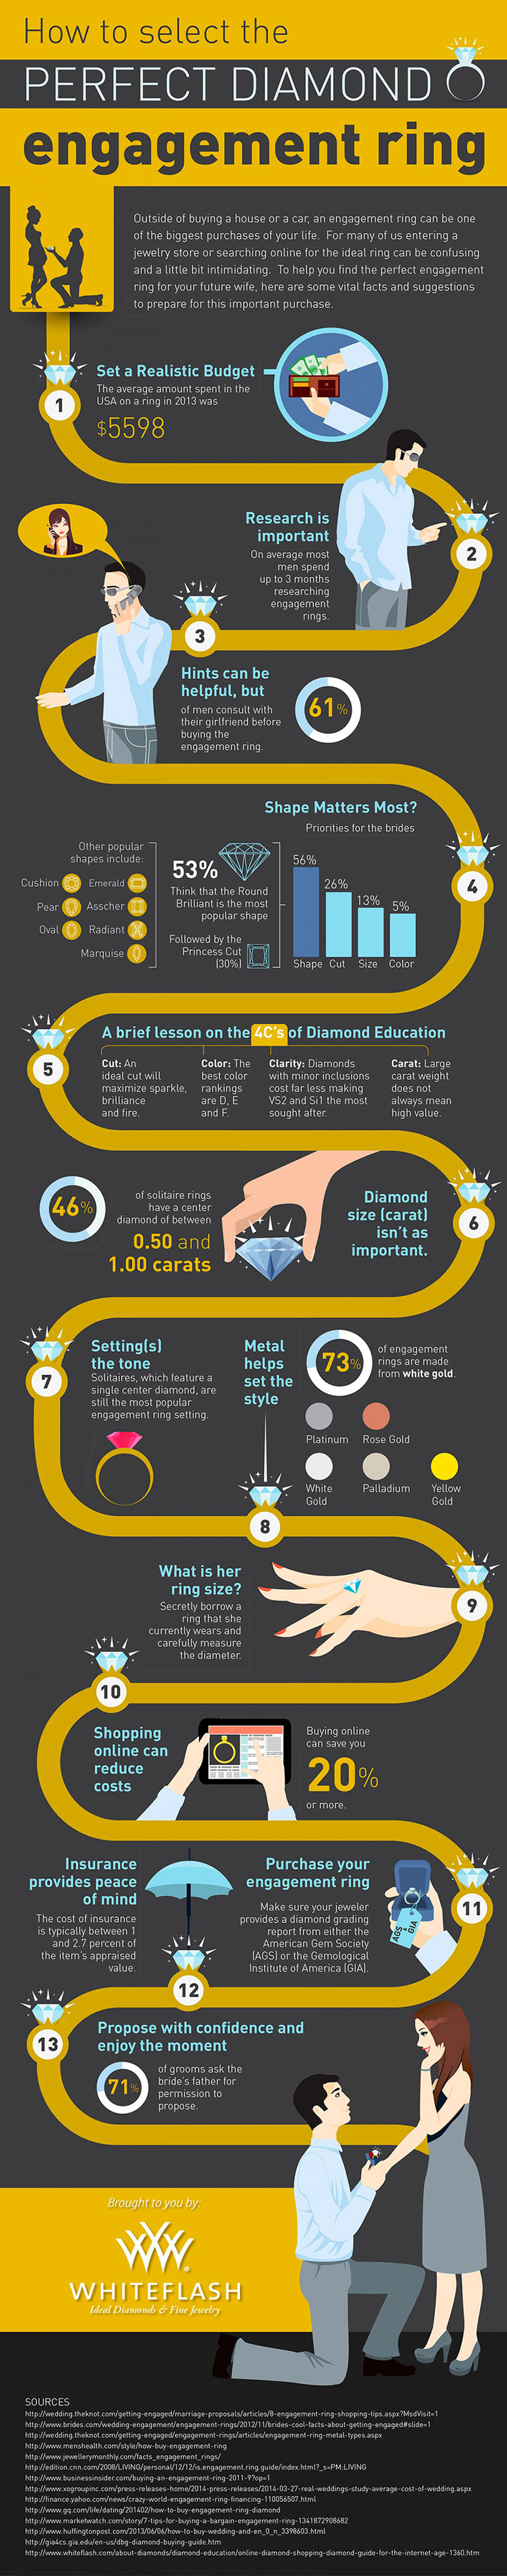 Mens Guide to Buying Diamond Engagement Ring Infographic